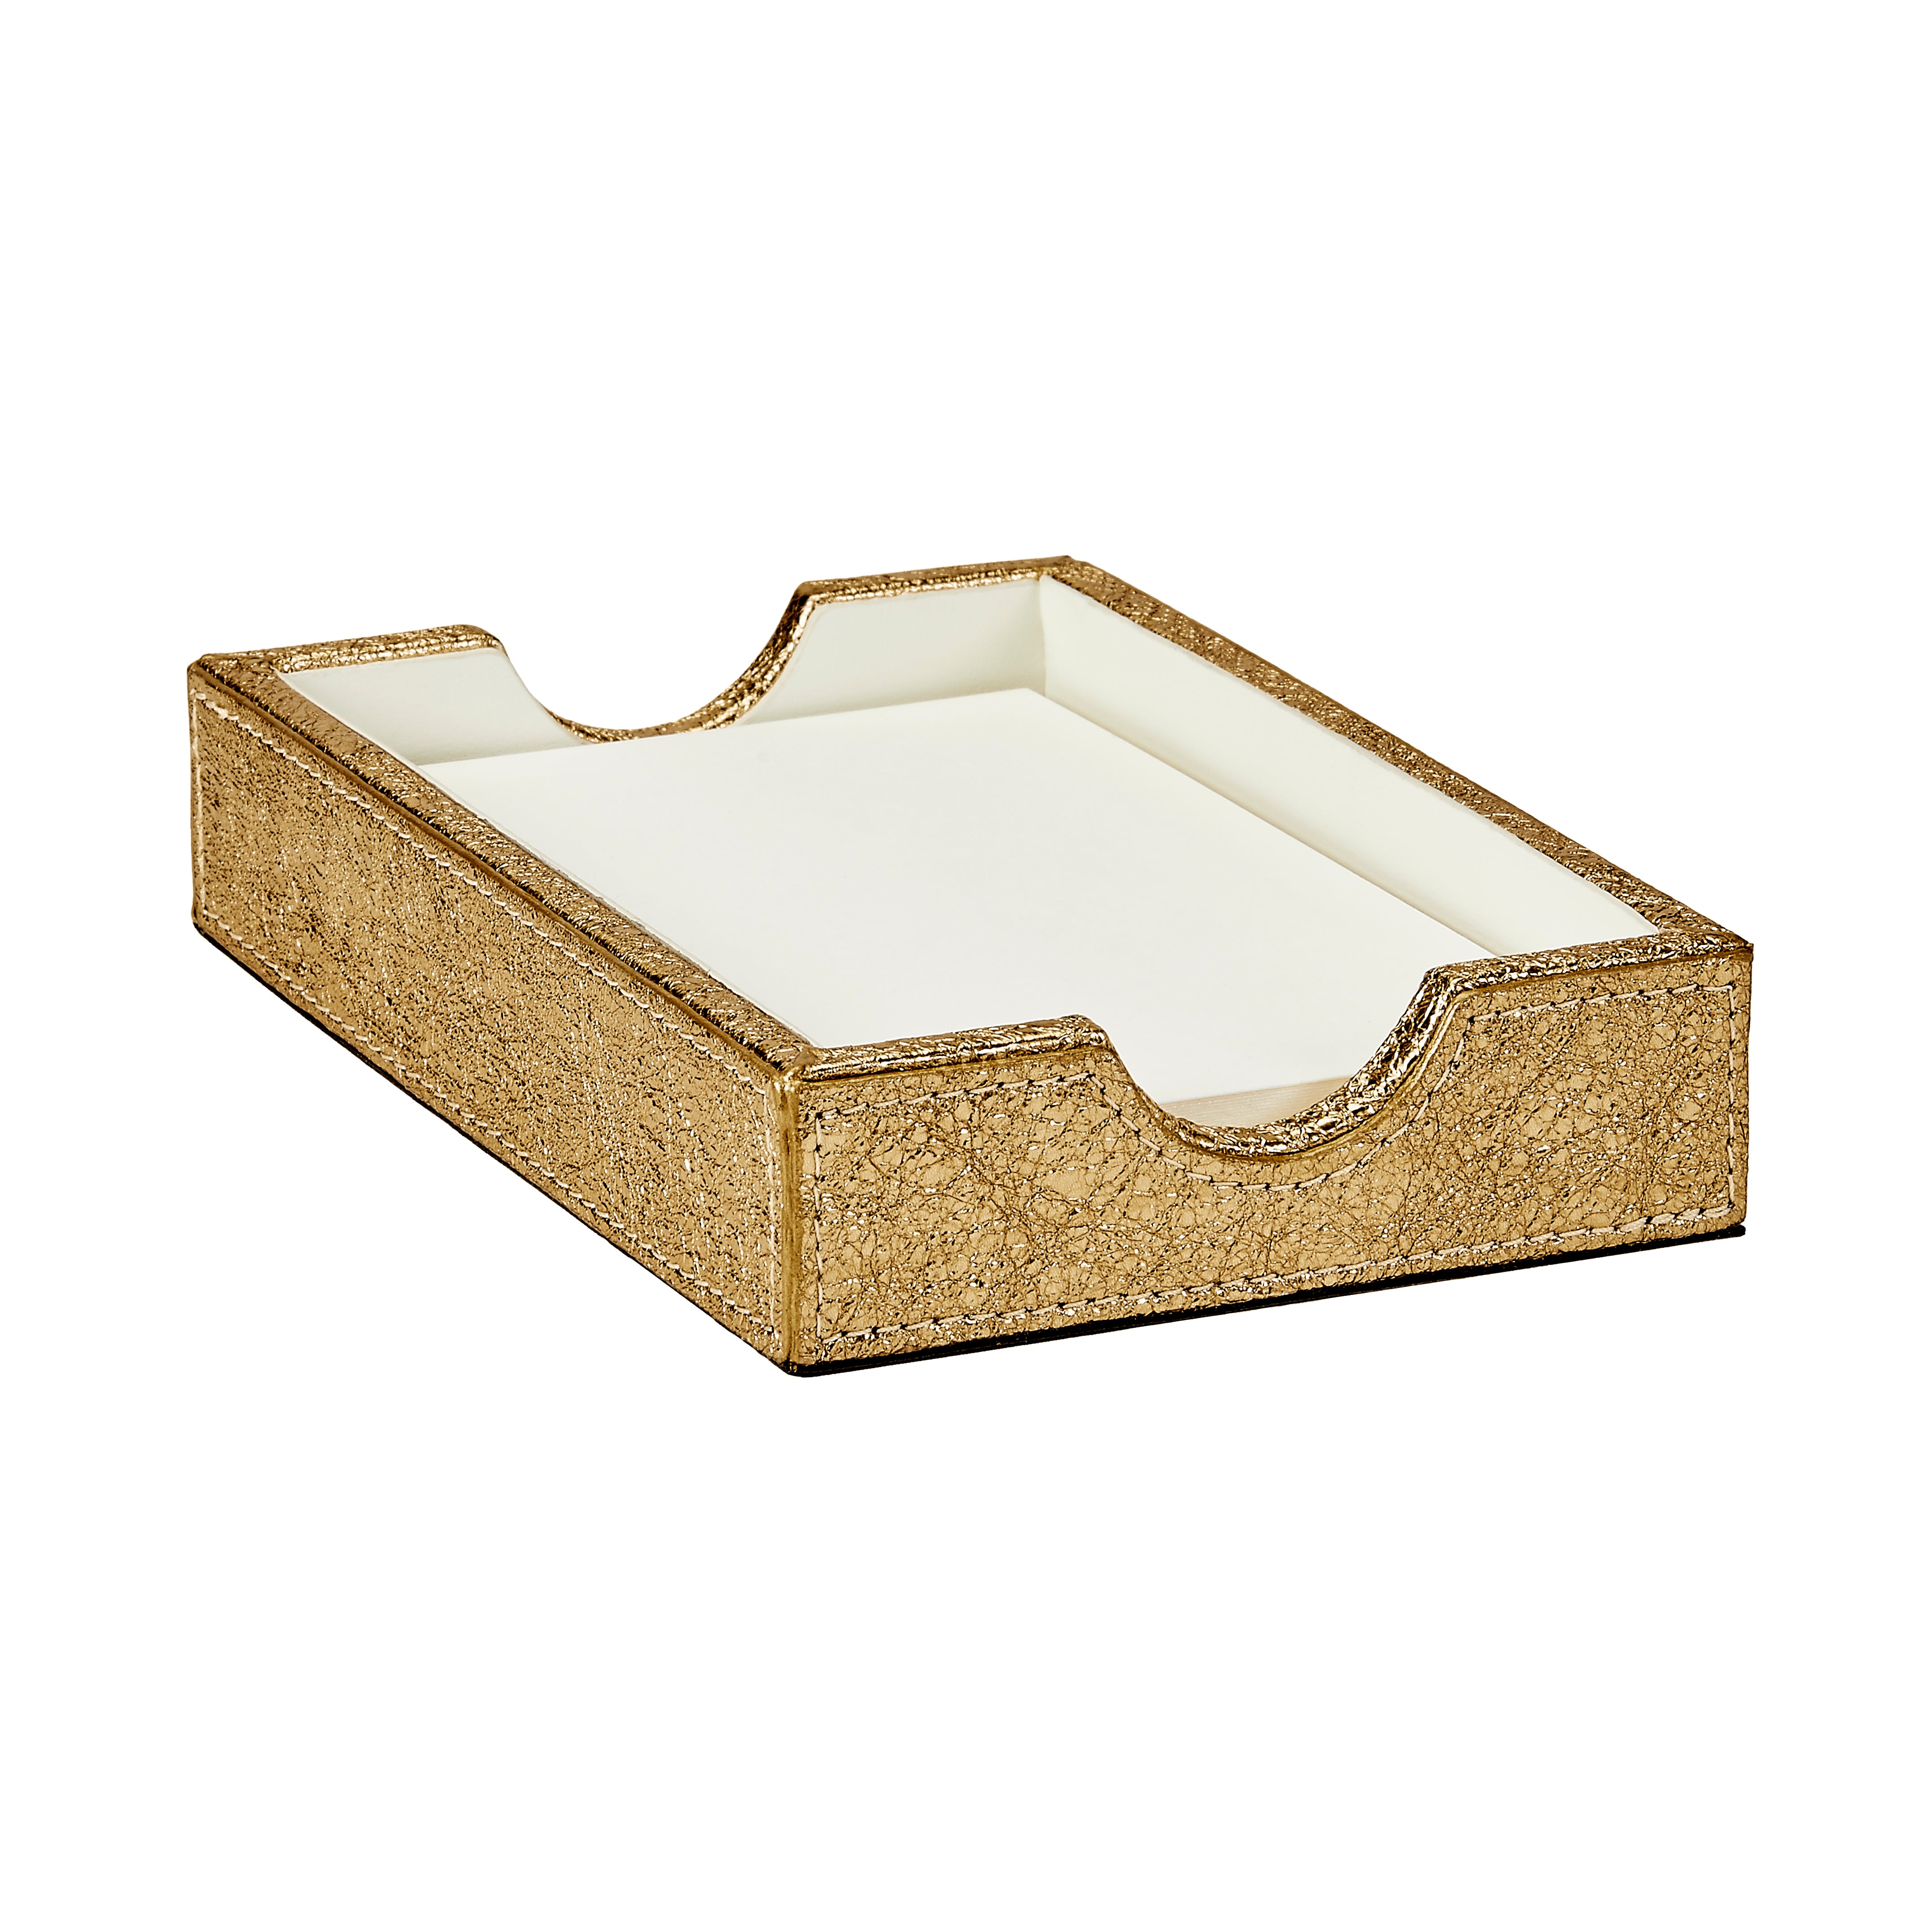 Graphic Image Memo Tray Gold Crackle Metallic Leather